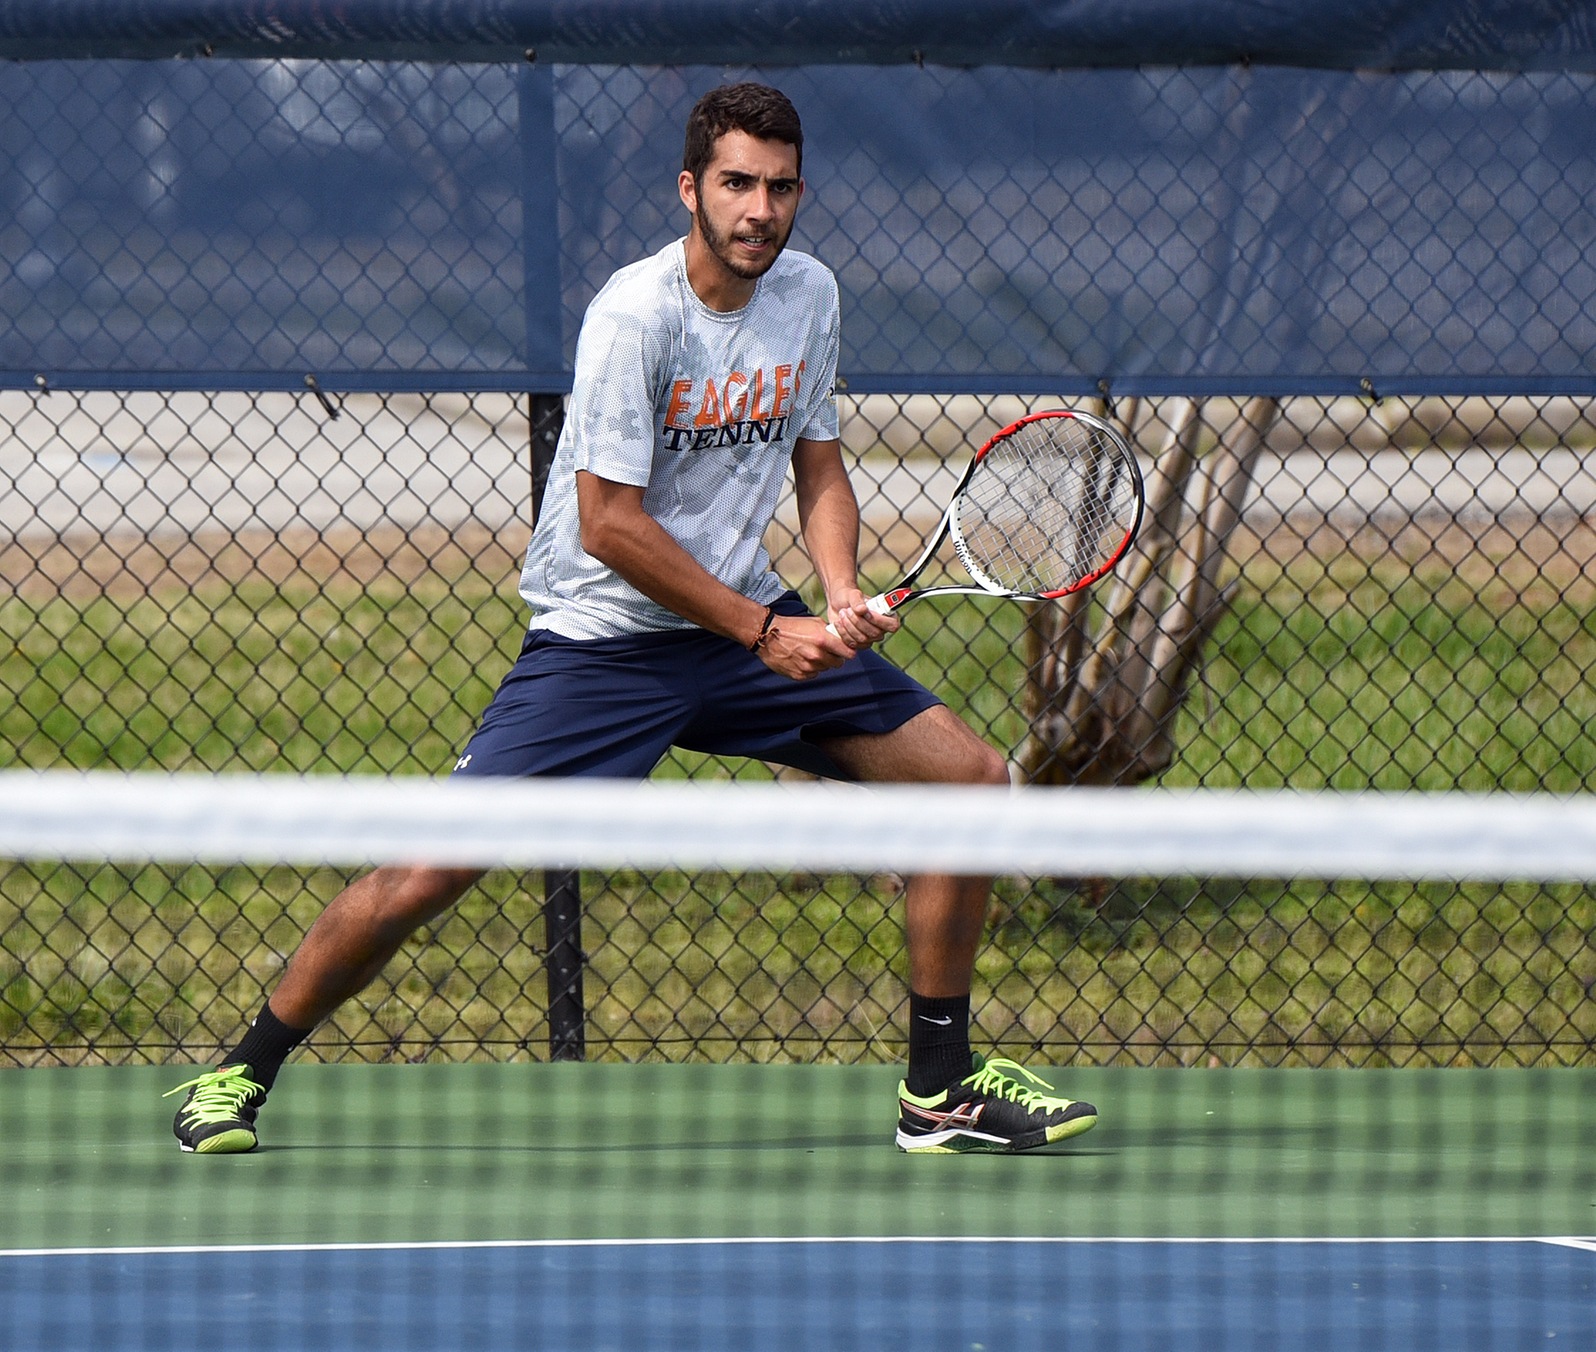 Schedule changes for Carson-Newman tennis teams